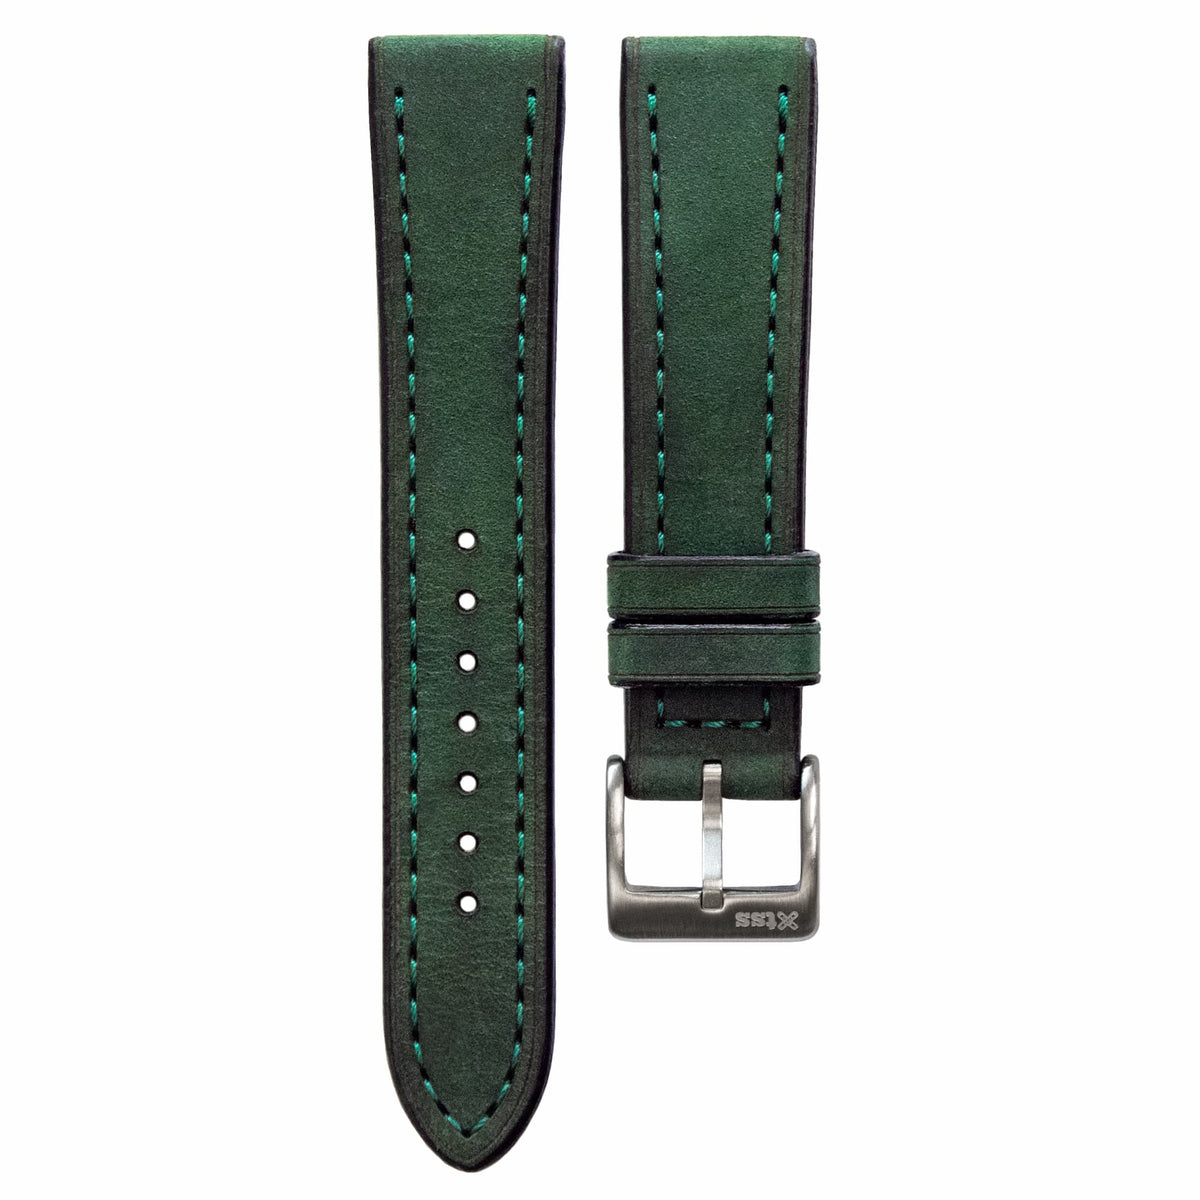 Black leather watch strap with light green stitch - Shop Teckel